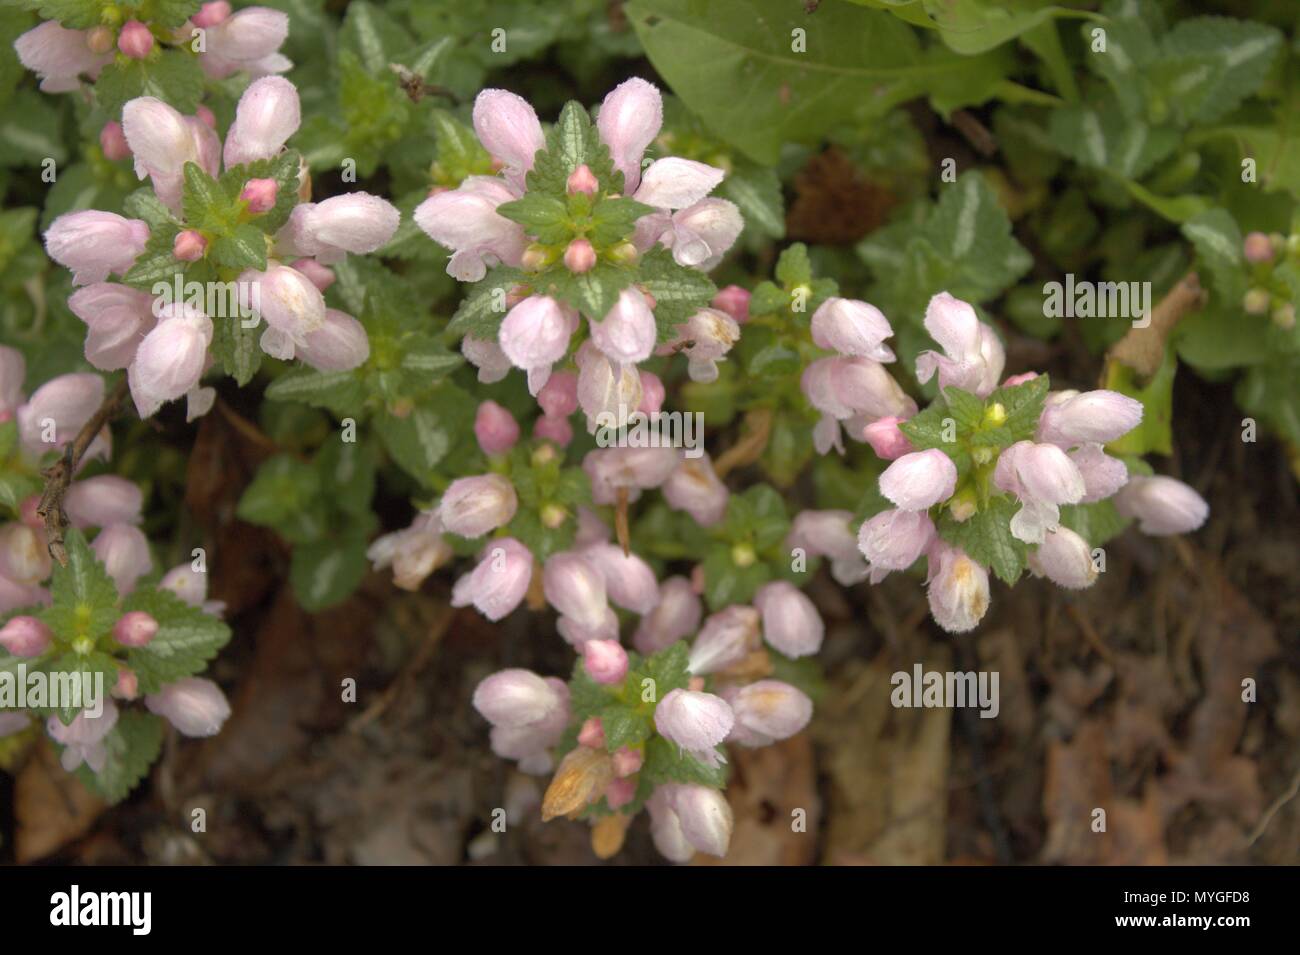 Pink Lamium With Variegated Leaves, Blooming Stock Photo